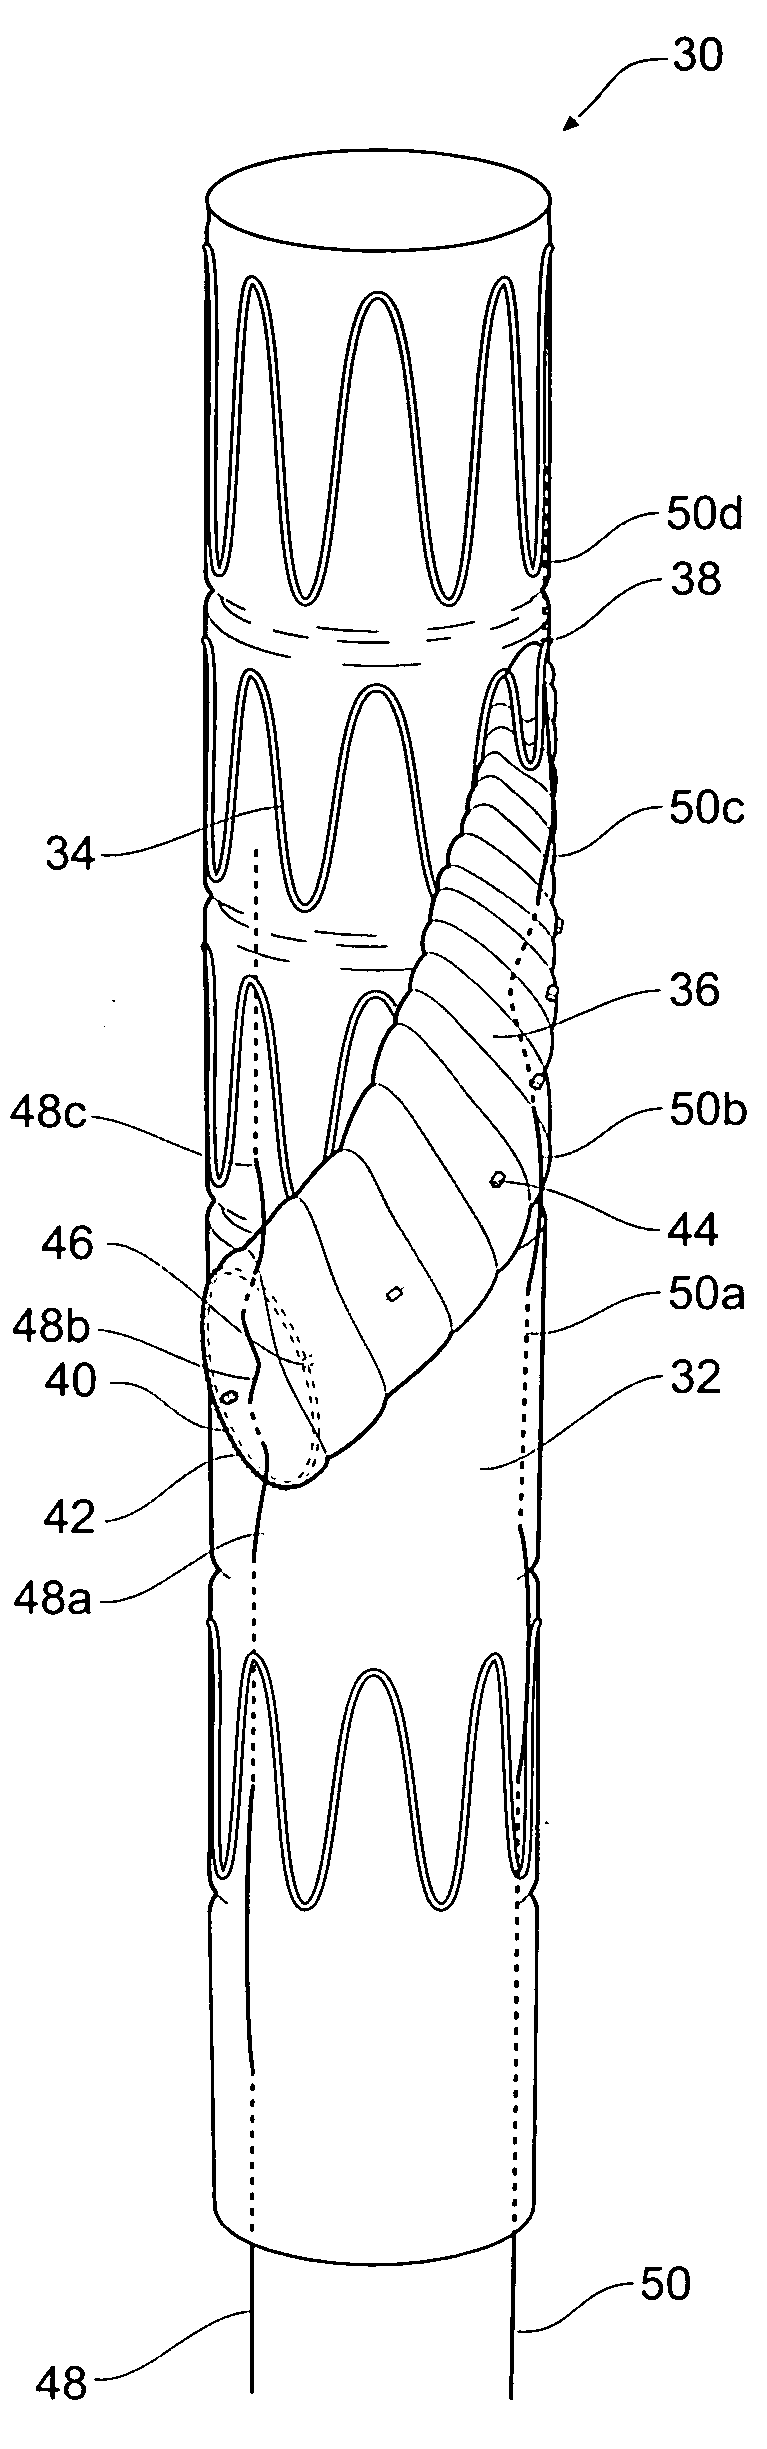 Helical arm tie down